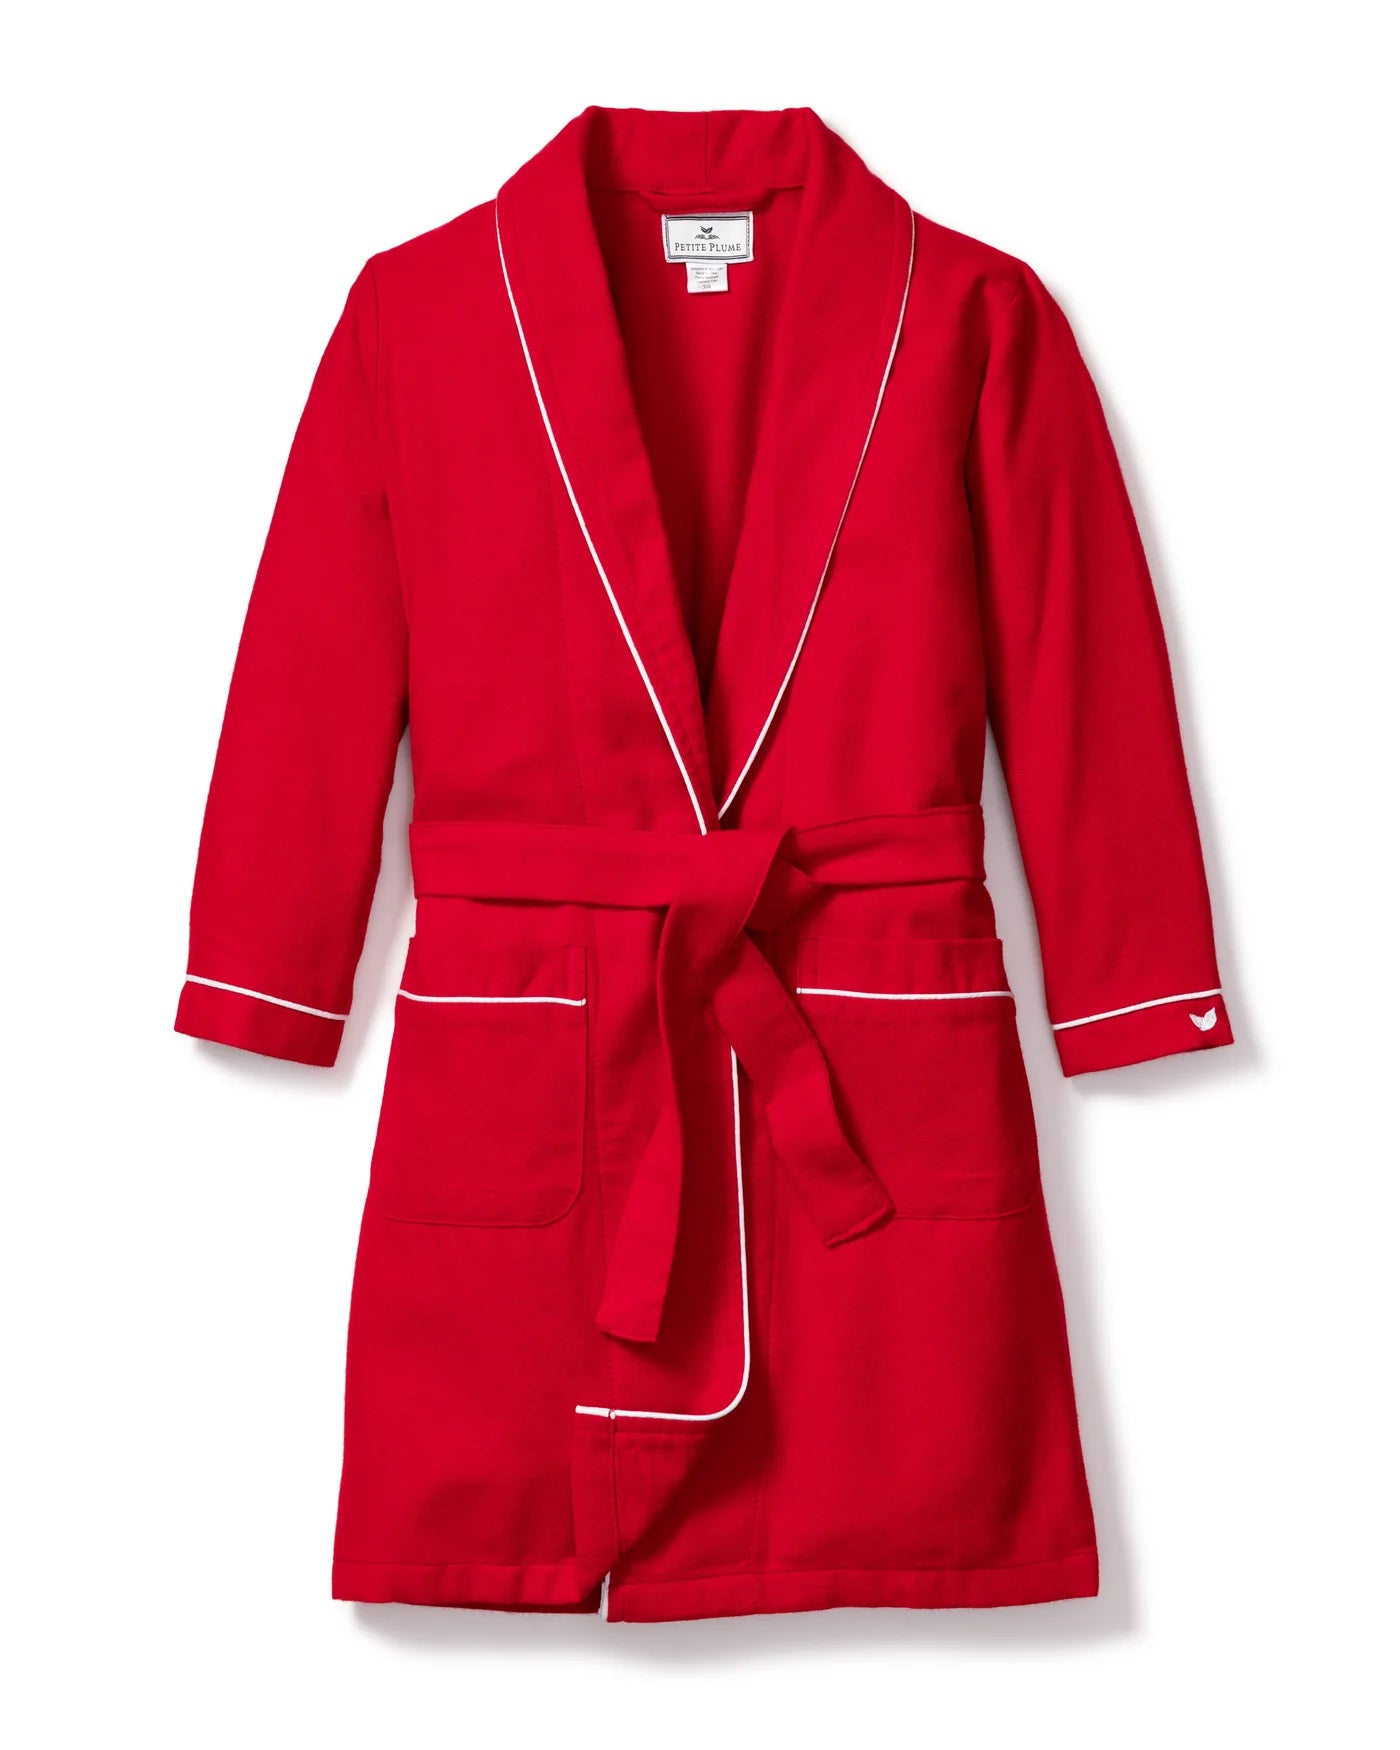 Petite Plume Children's Red Flannel Robe with White Piping